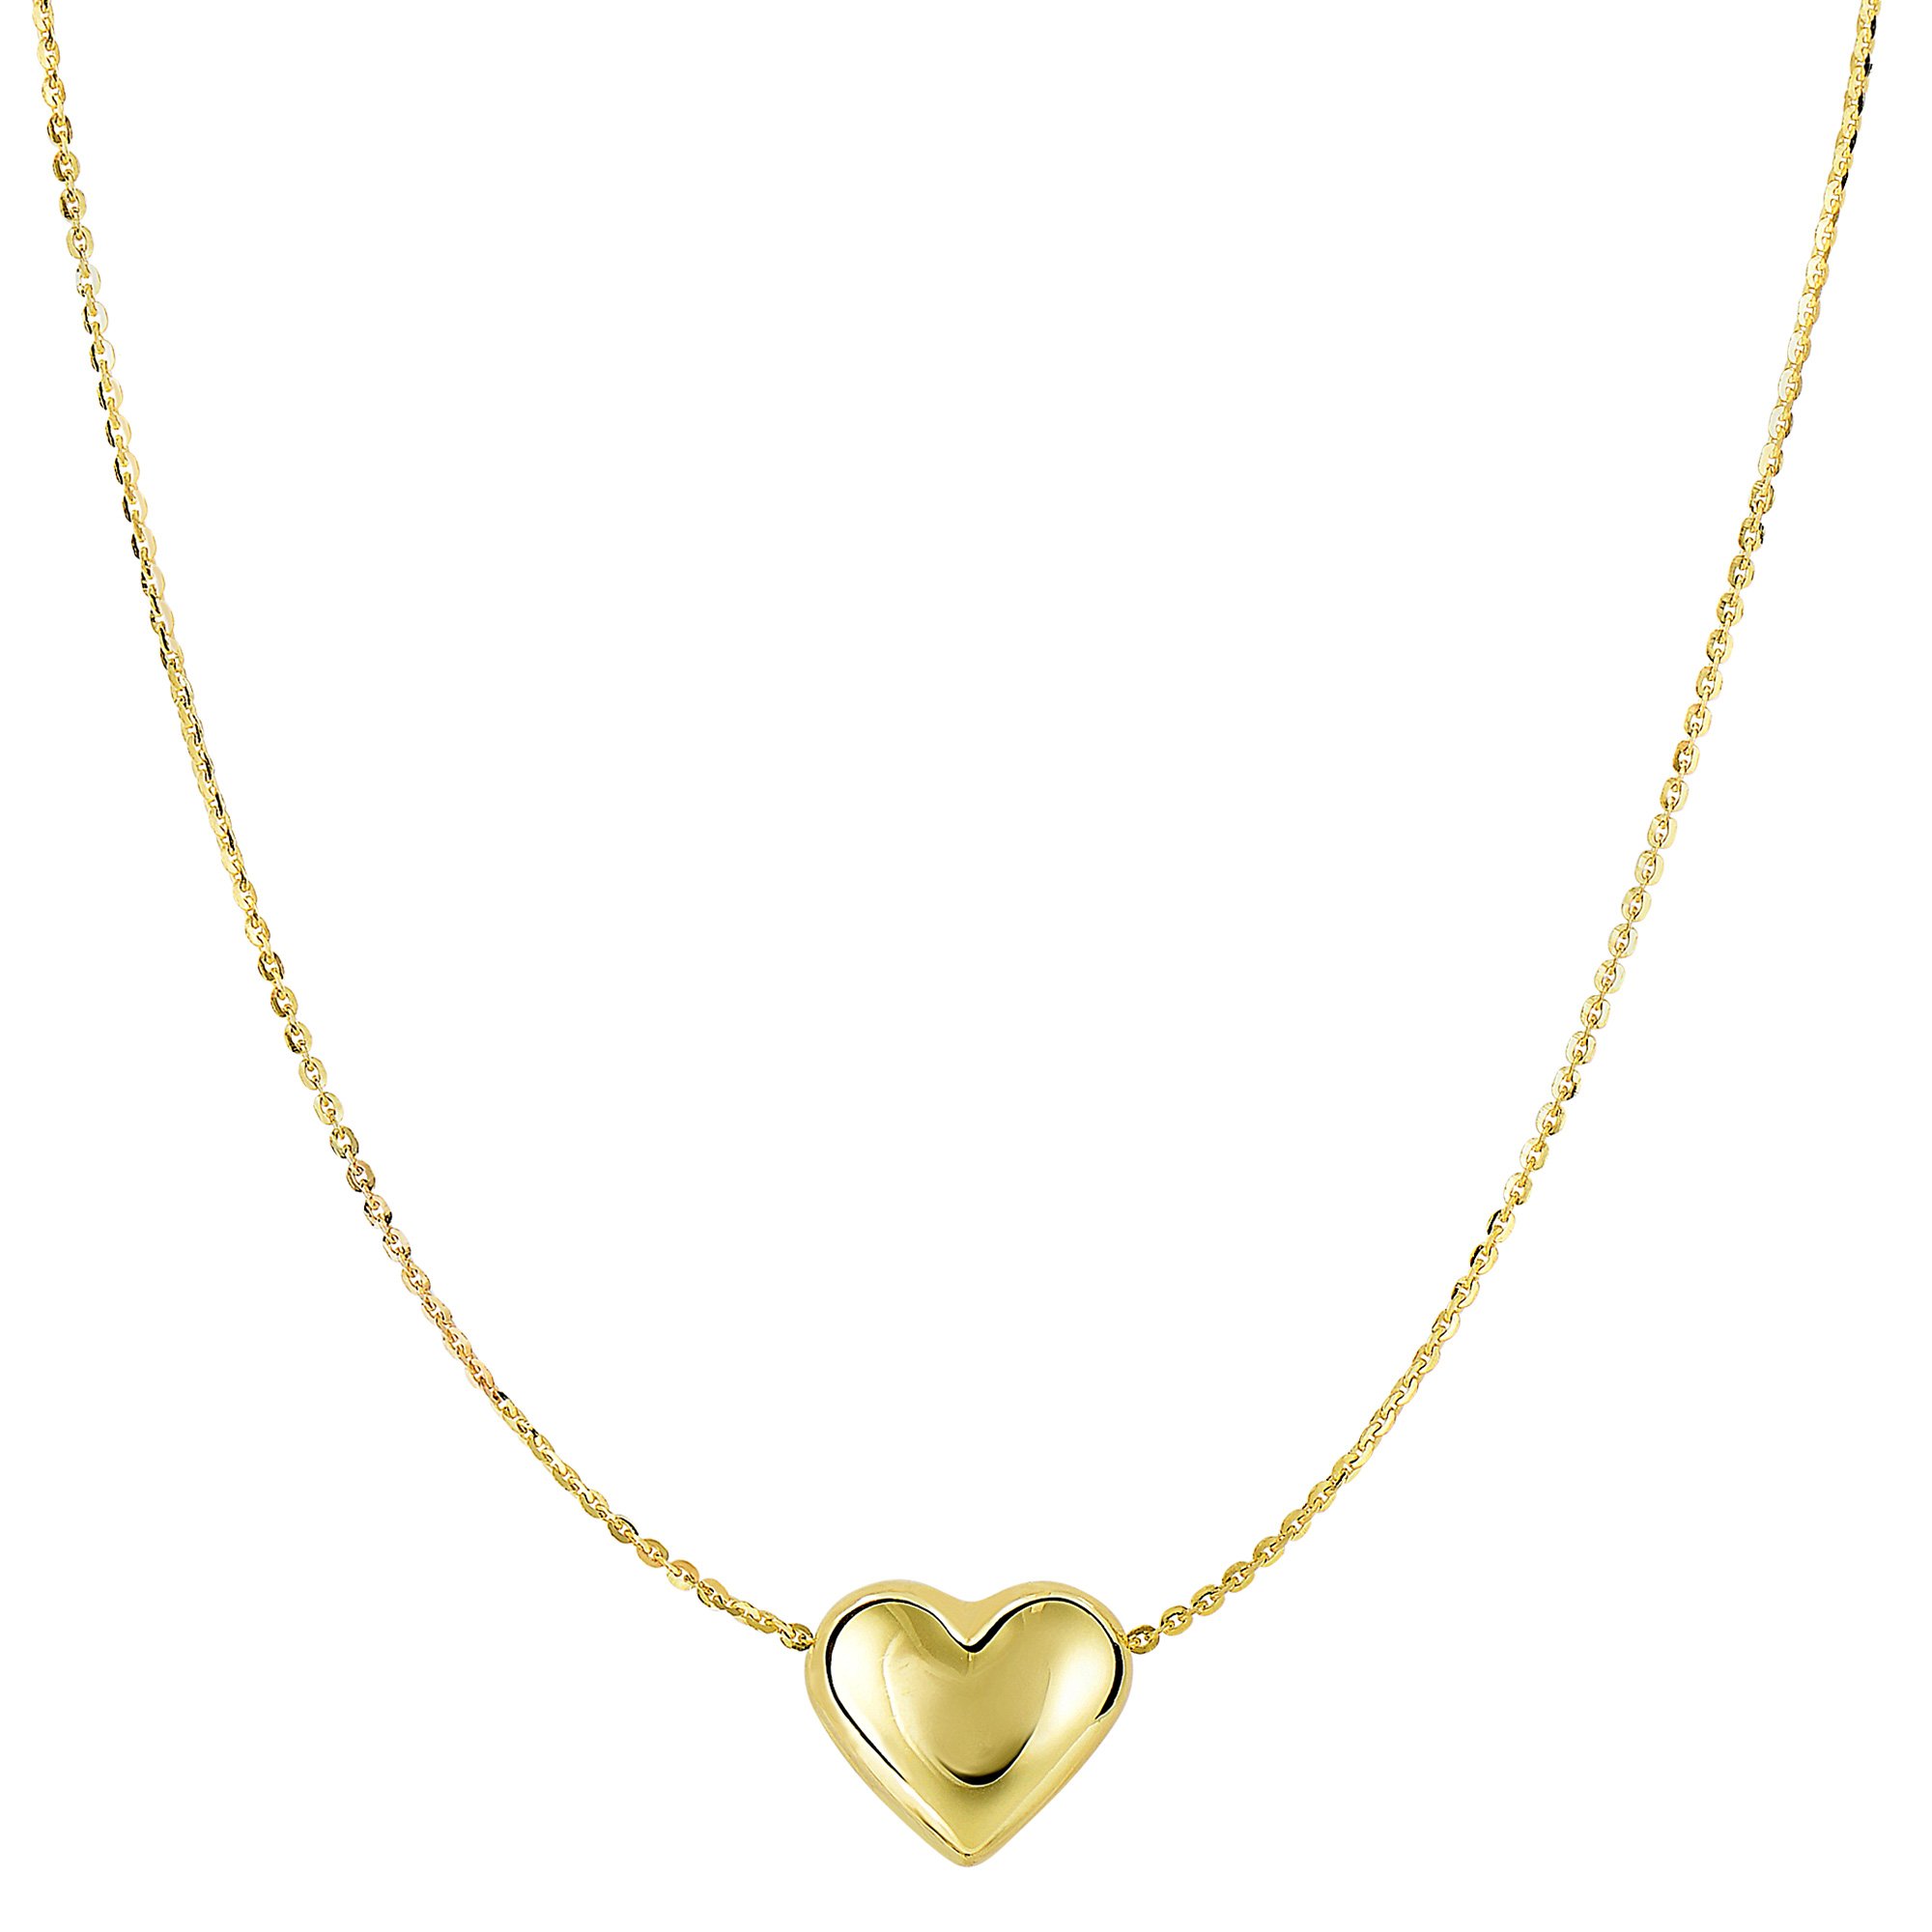 Jewelry Affairs 14k Yellow Gold Sliding Puffed Heart Pendant Necklace, 18